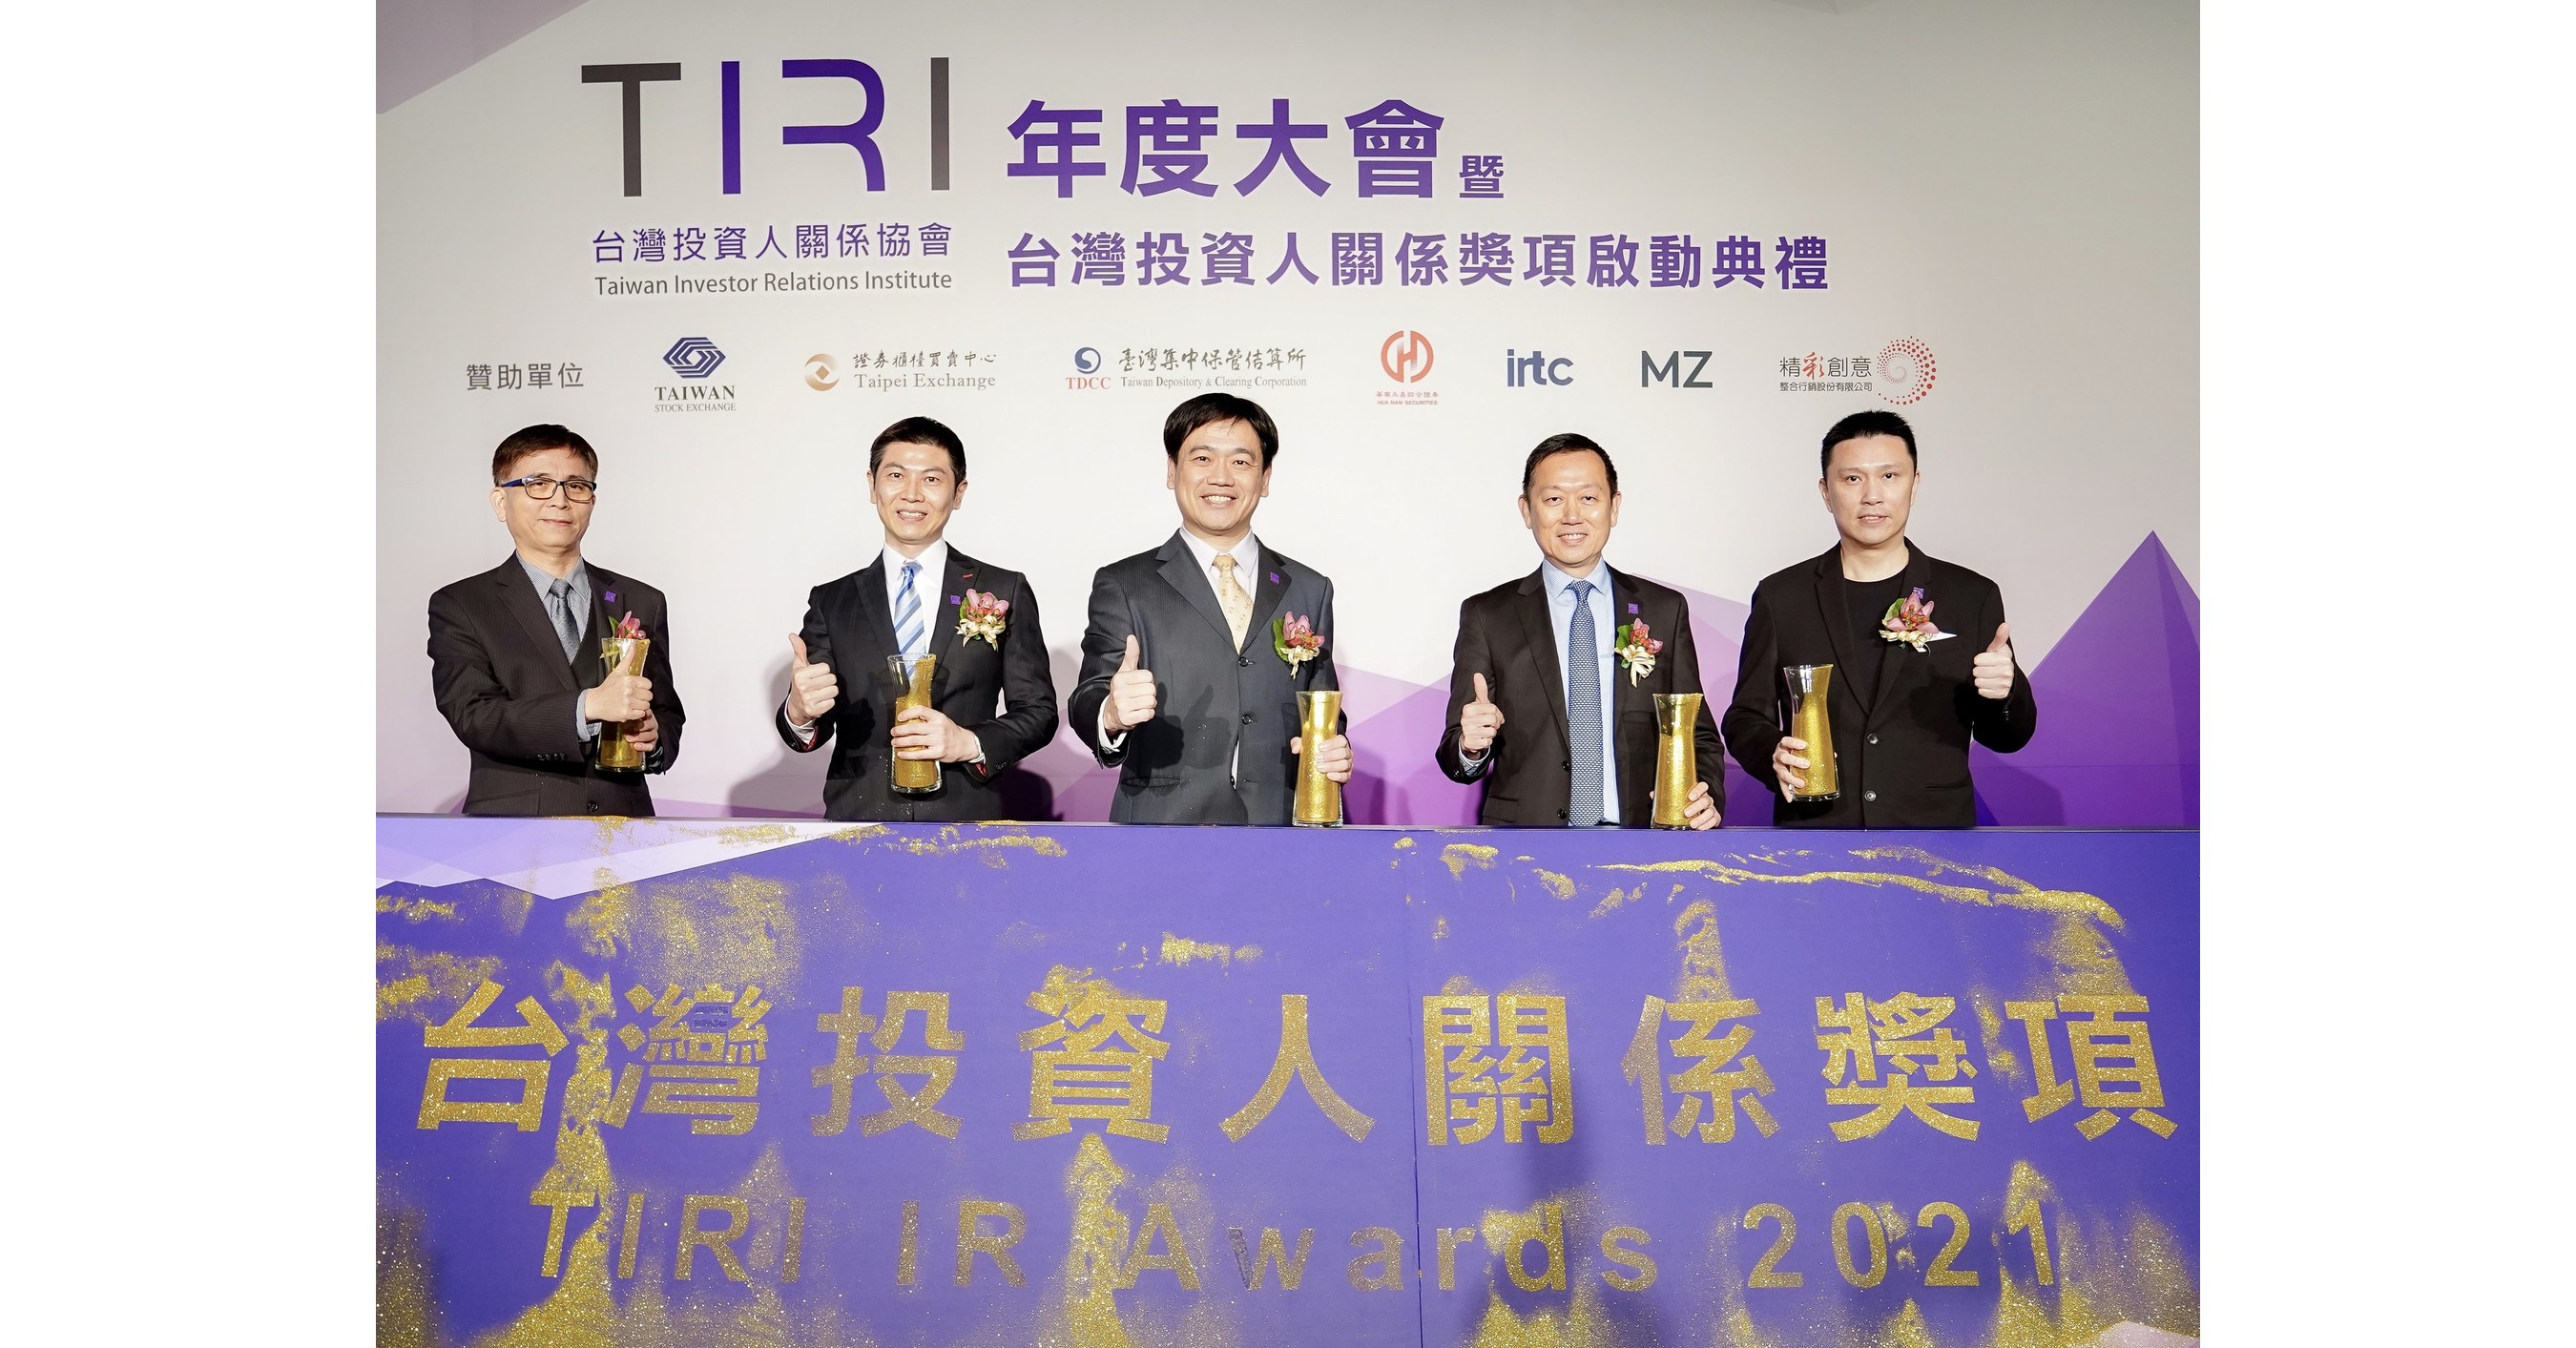 Taiwan TIRI IR Awards Officially Launched